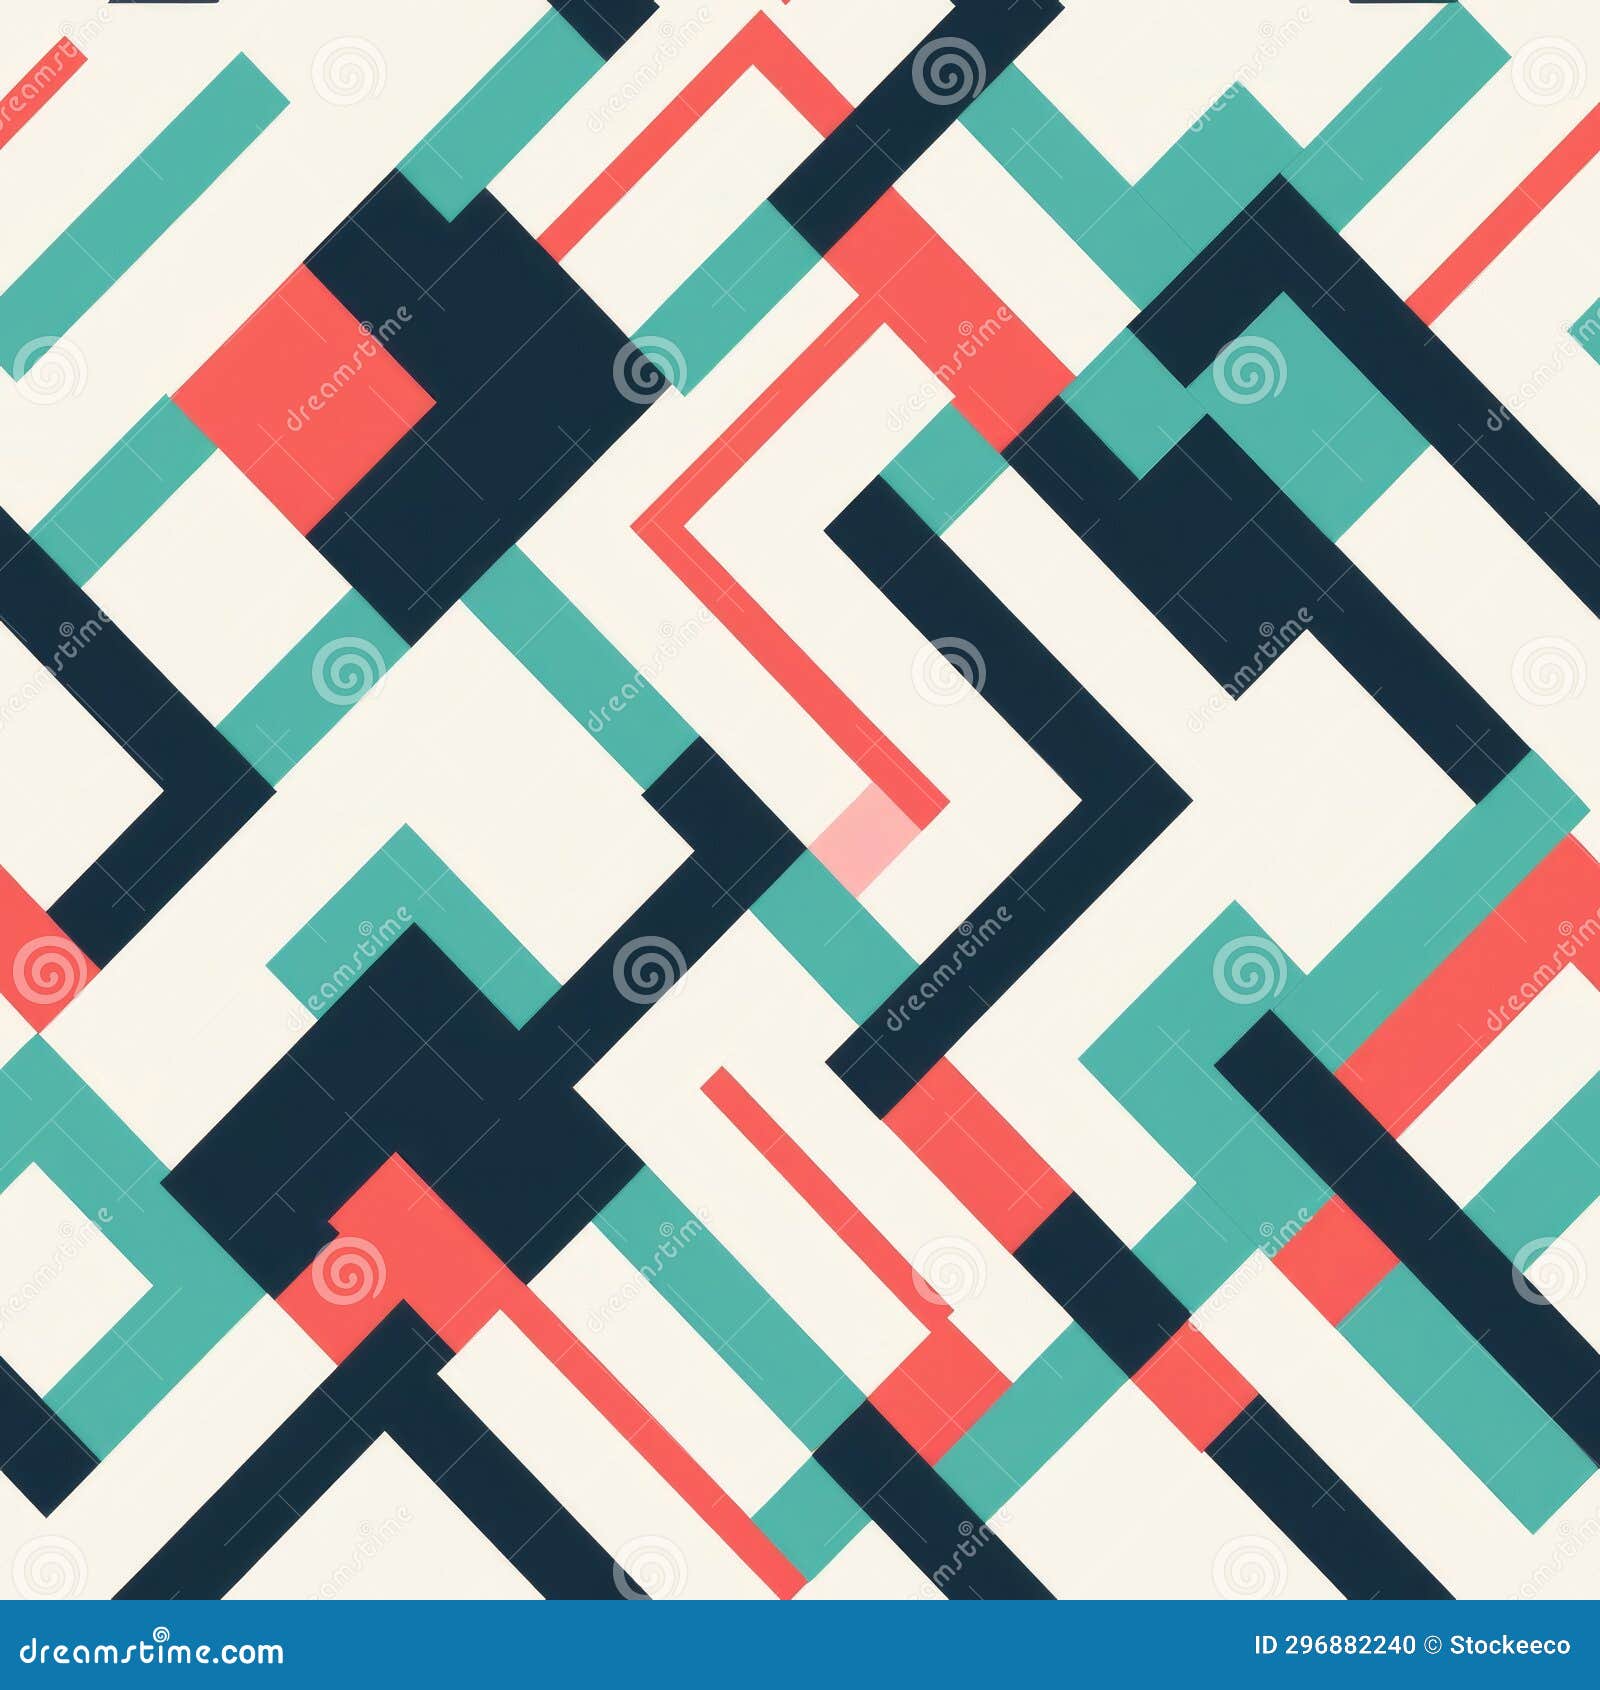 geometric red and blue abstract pattern with striped s